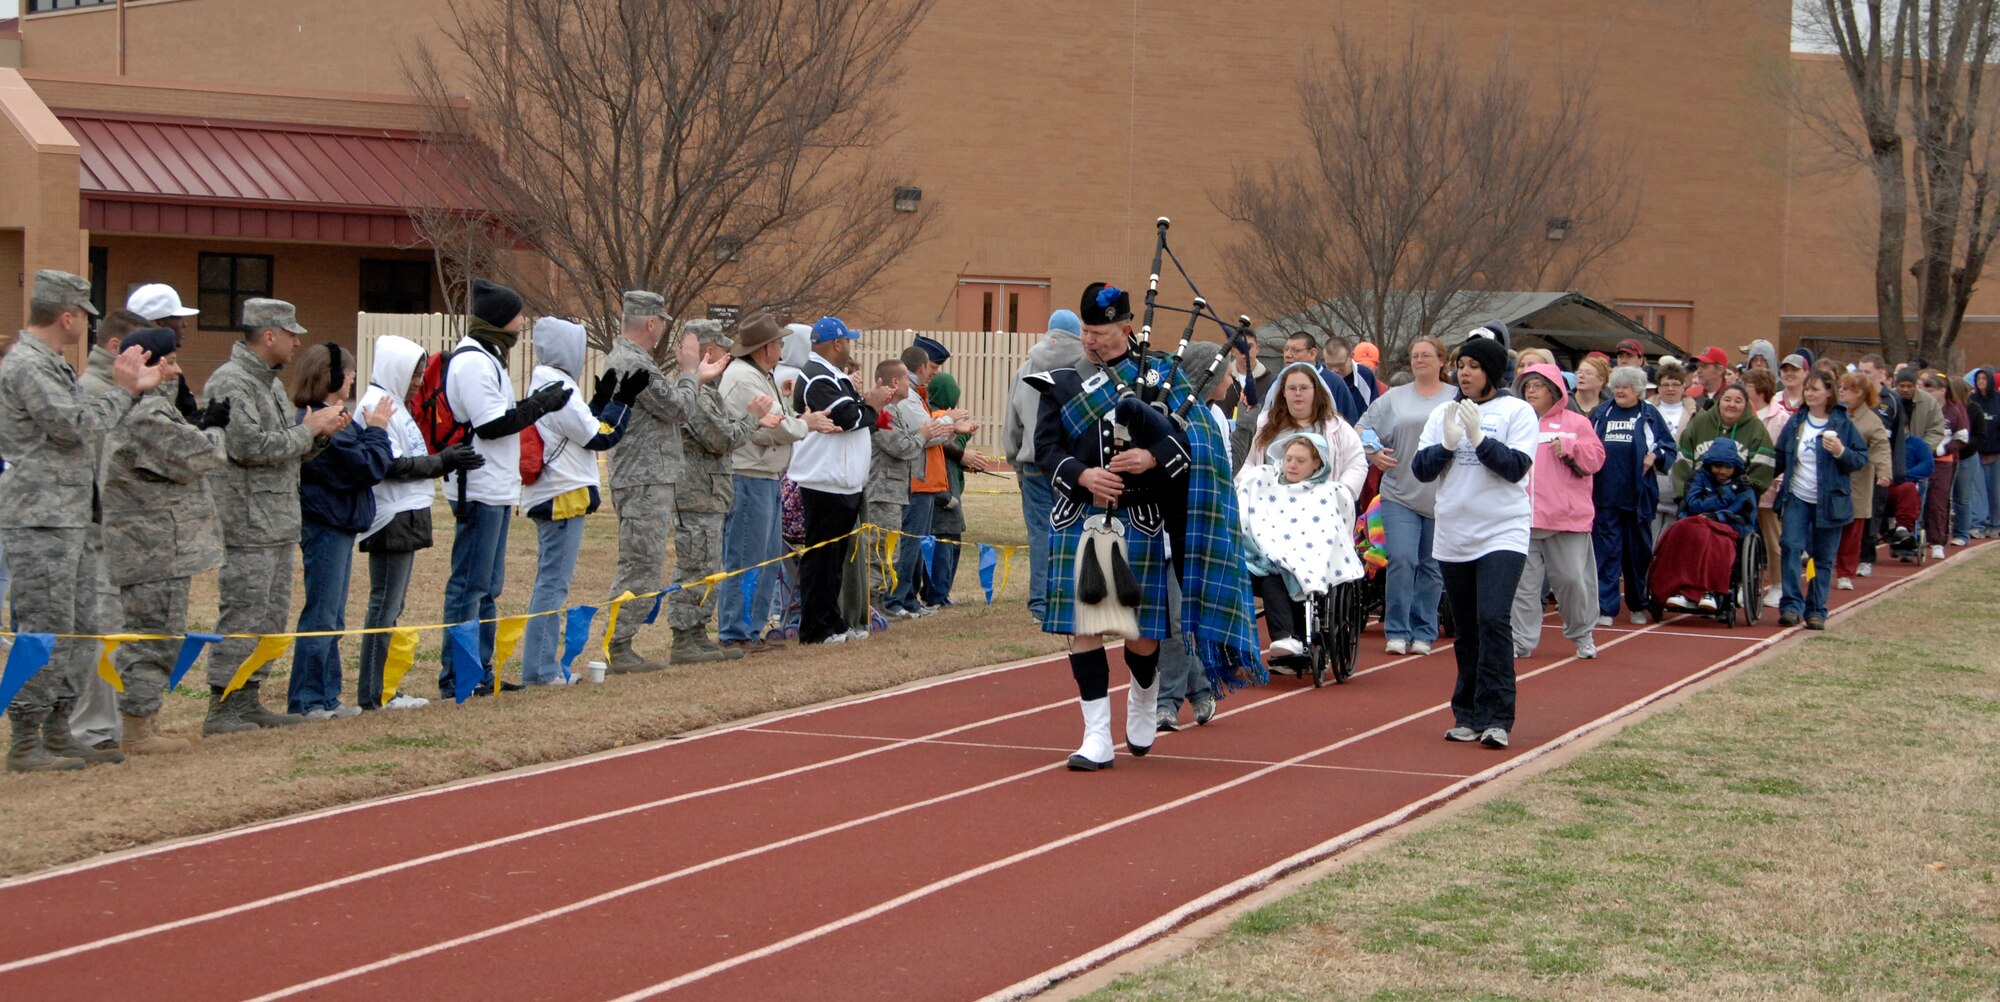 Chaplain (Lt. Col.) Michael Gilbert, 71st Flying Training Wing chaplain, leads the athletes participating in the 2009 Cherokee Strip Area 6 Special Olympics, as they parade around the running track at Vance March 26. Chaplain Gilbert played “Scotland the Brave” on the bagpipe. More than 250 Vance Airmen volunteered to assist 225 athletes competing in 13 events. Qualifying athletes will compete at the state-level Special Olympics in Stillwater, Okla., in May. (U.S. Air Force photo by Terry Wasson)